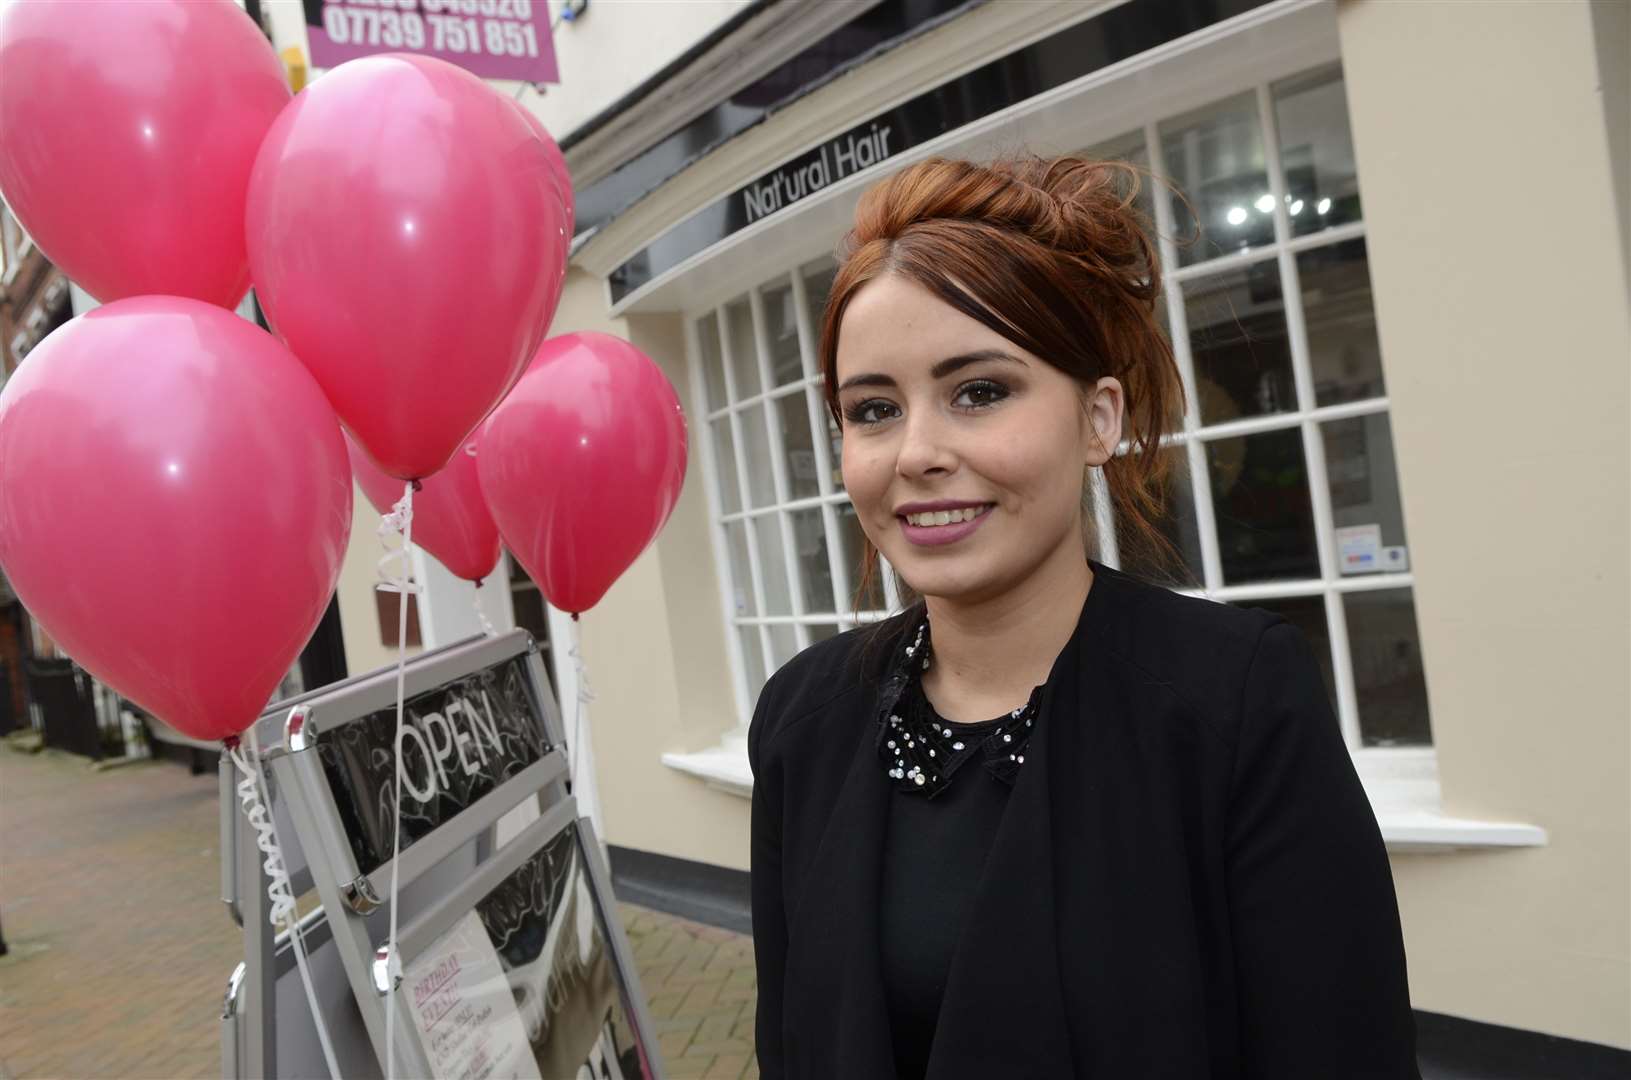 Teenager Chelsea Ford opened Nat'ural Hair in 2013 in memory of her boss and friend